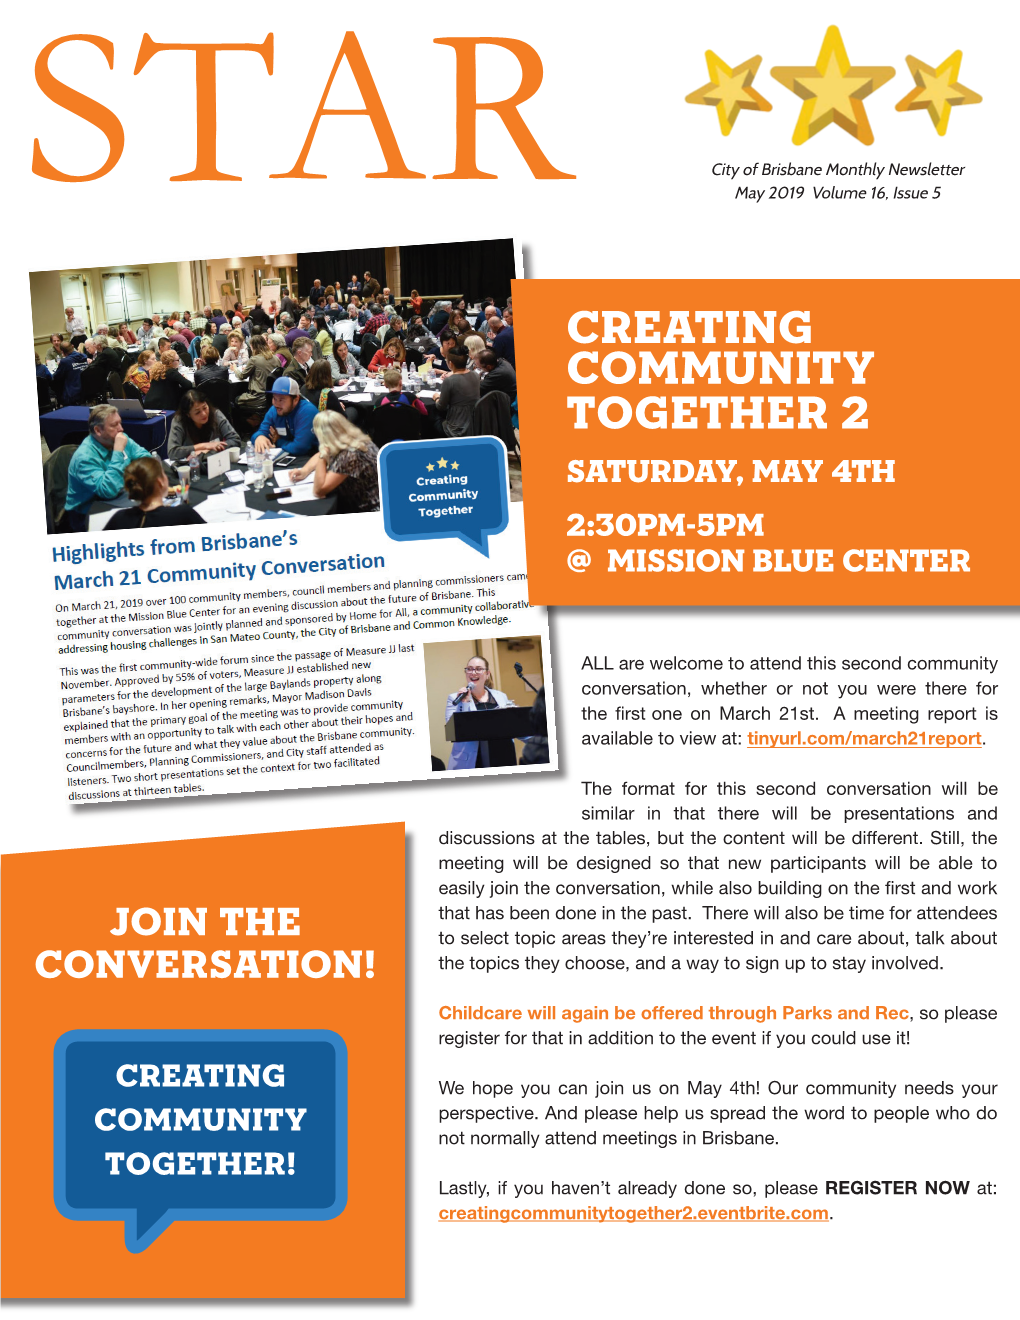 Creating Community Together 2 Saturday, May 4Th 2:30Pm-5Pm @ Mission Blue Center